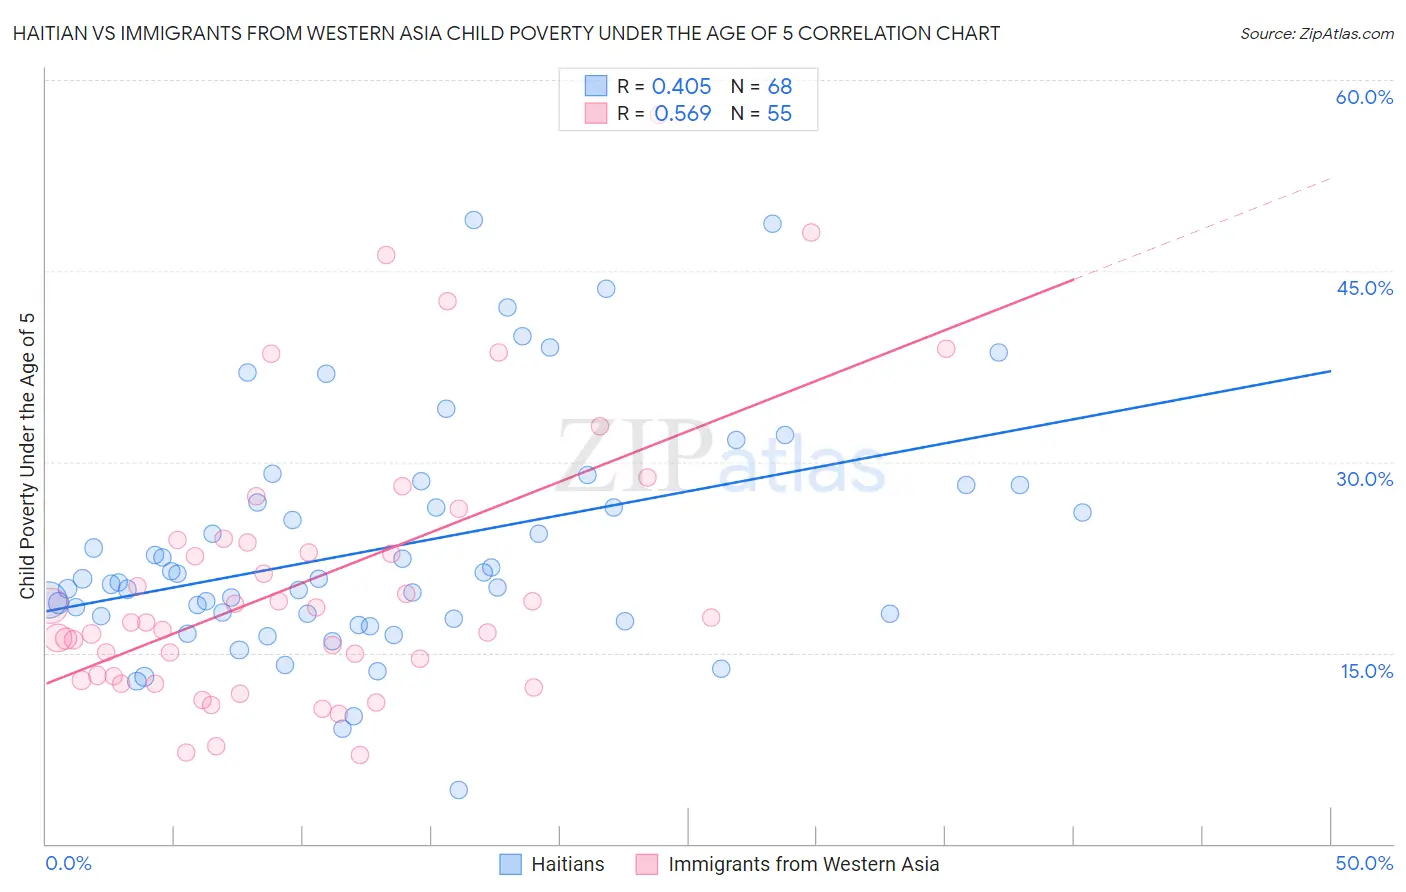 Haitian vs Immigrants from Western Asia Child Poverty Under the Age of 5